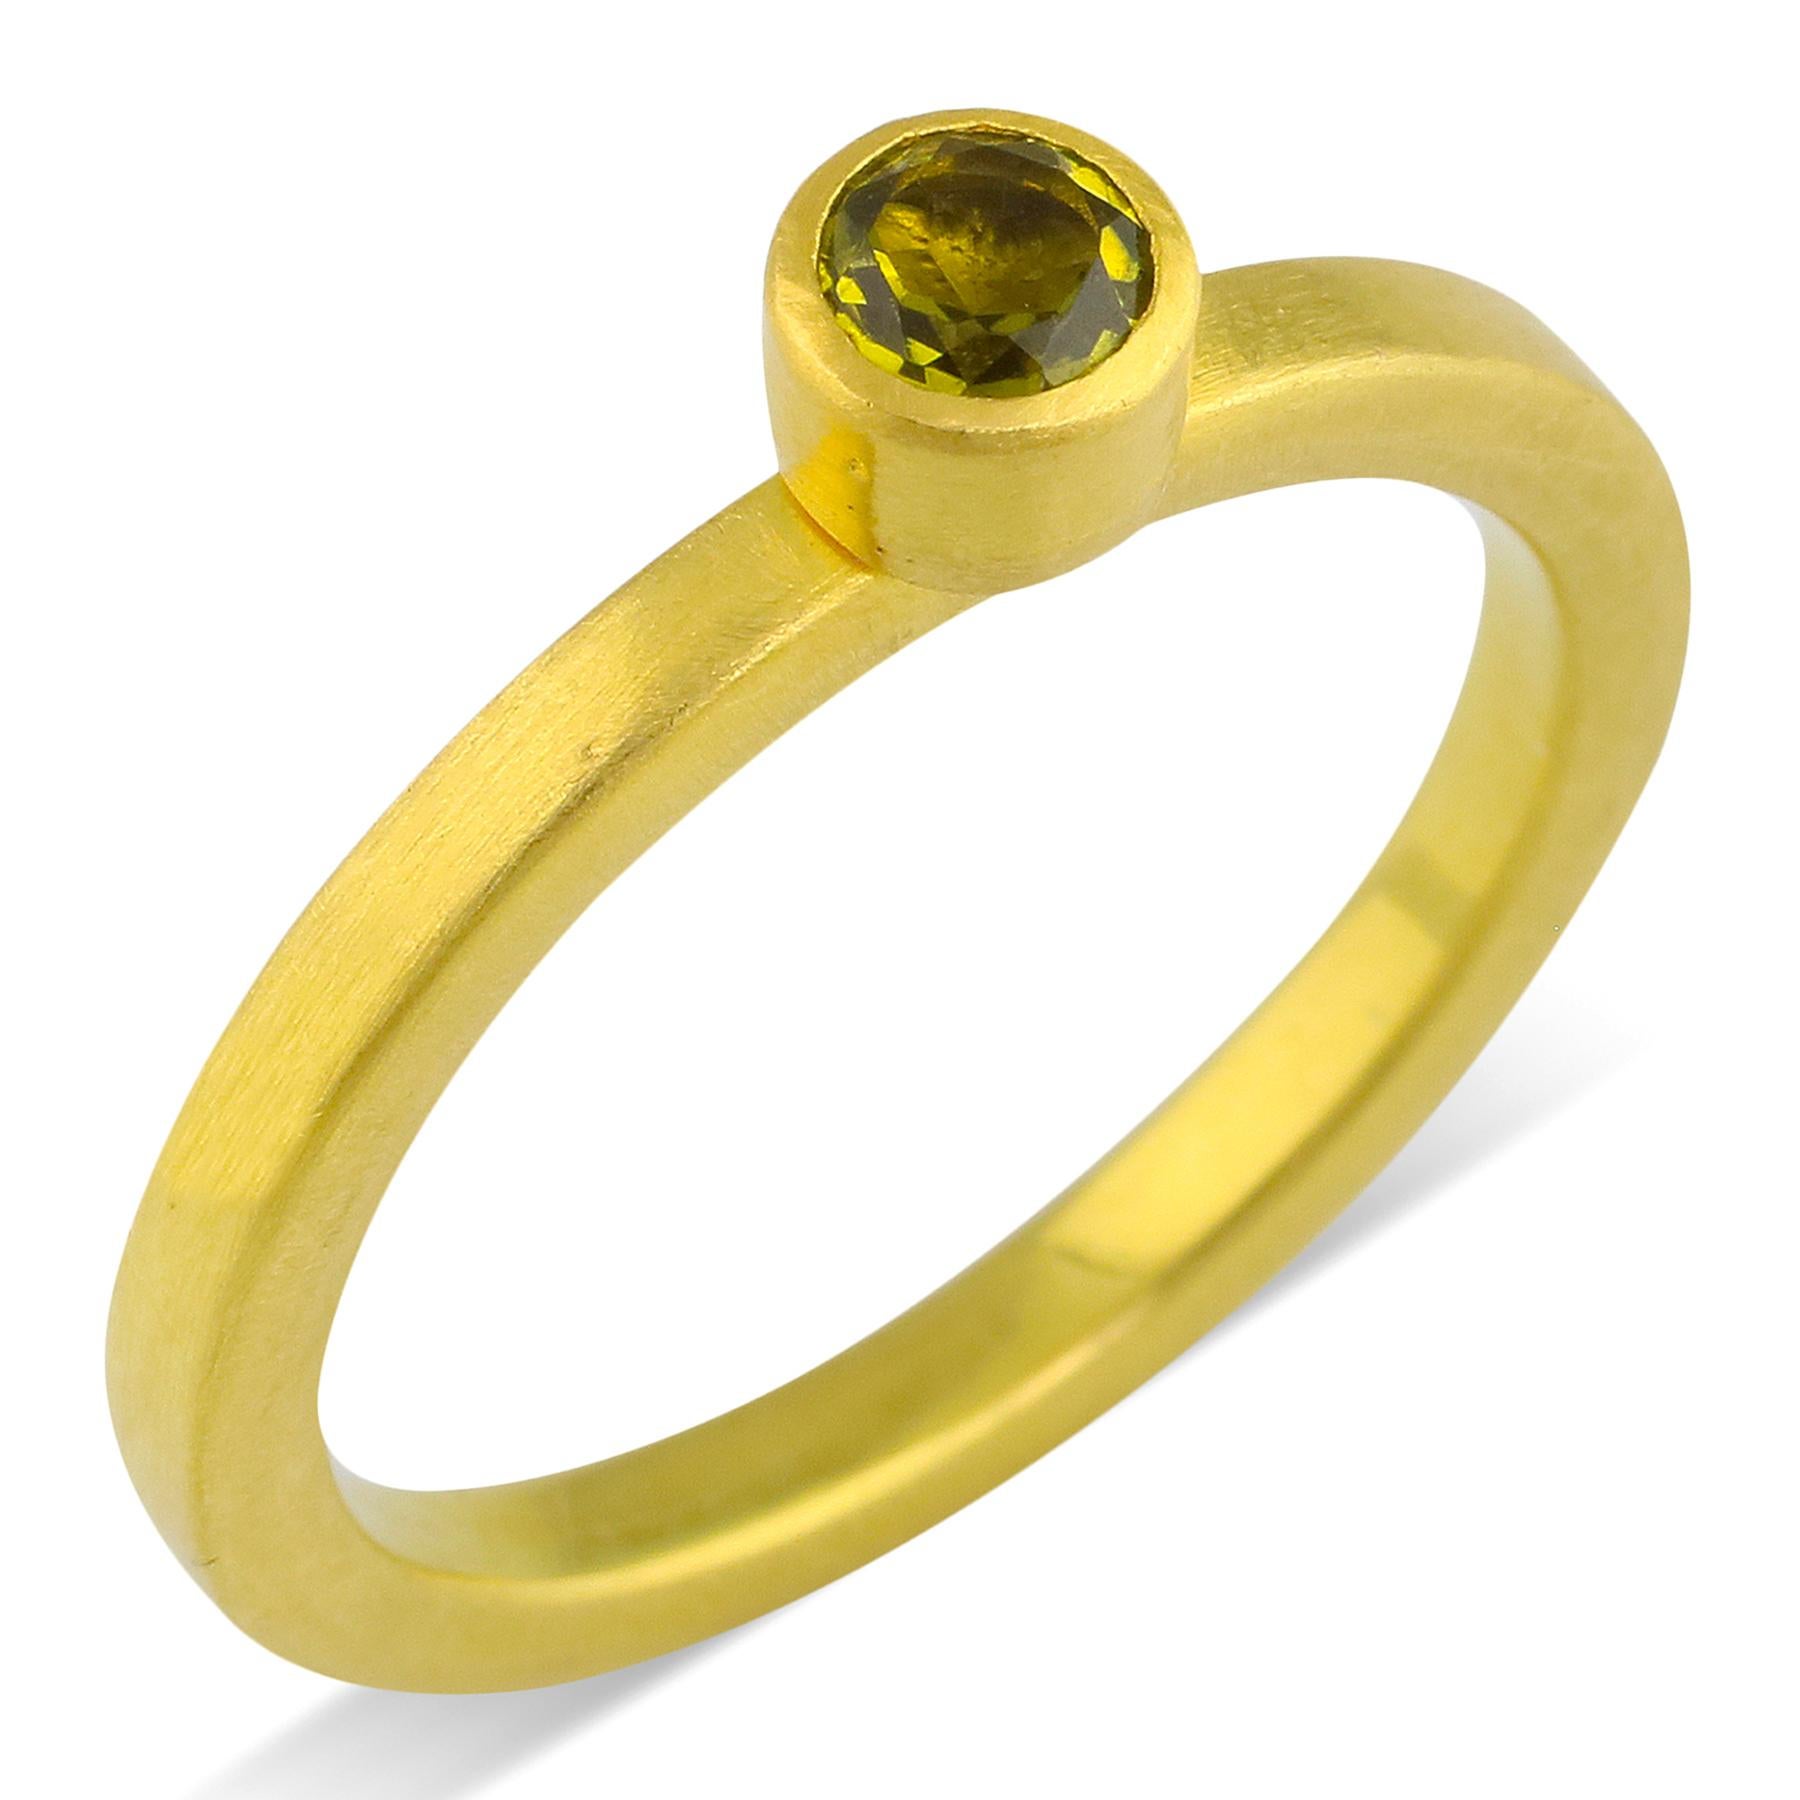 PHILIPPE-SPENCER -   .24 Ct. Faceted Olive Tourmaline wrapped in 22K Gold Bezel Setting, with Anvil-Forged Solid 20K Gold 2.25mm x 2mm Band. Heavy Brushed Exterior, Mirror Polish Interior.  Size 7, and is in-stock and ready to ship. Our apologies in